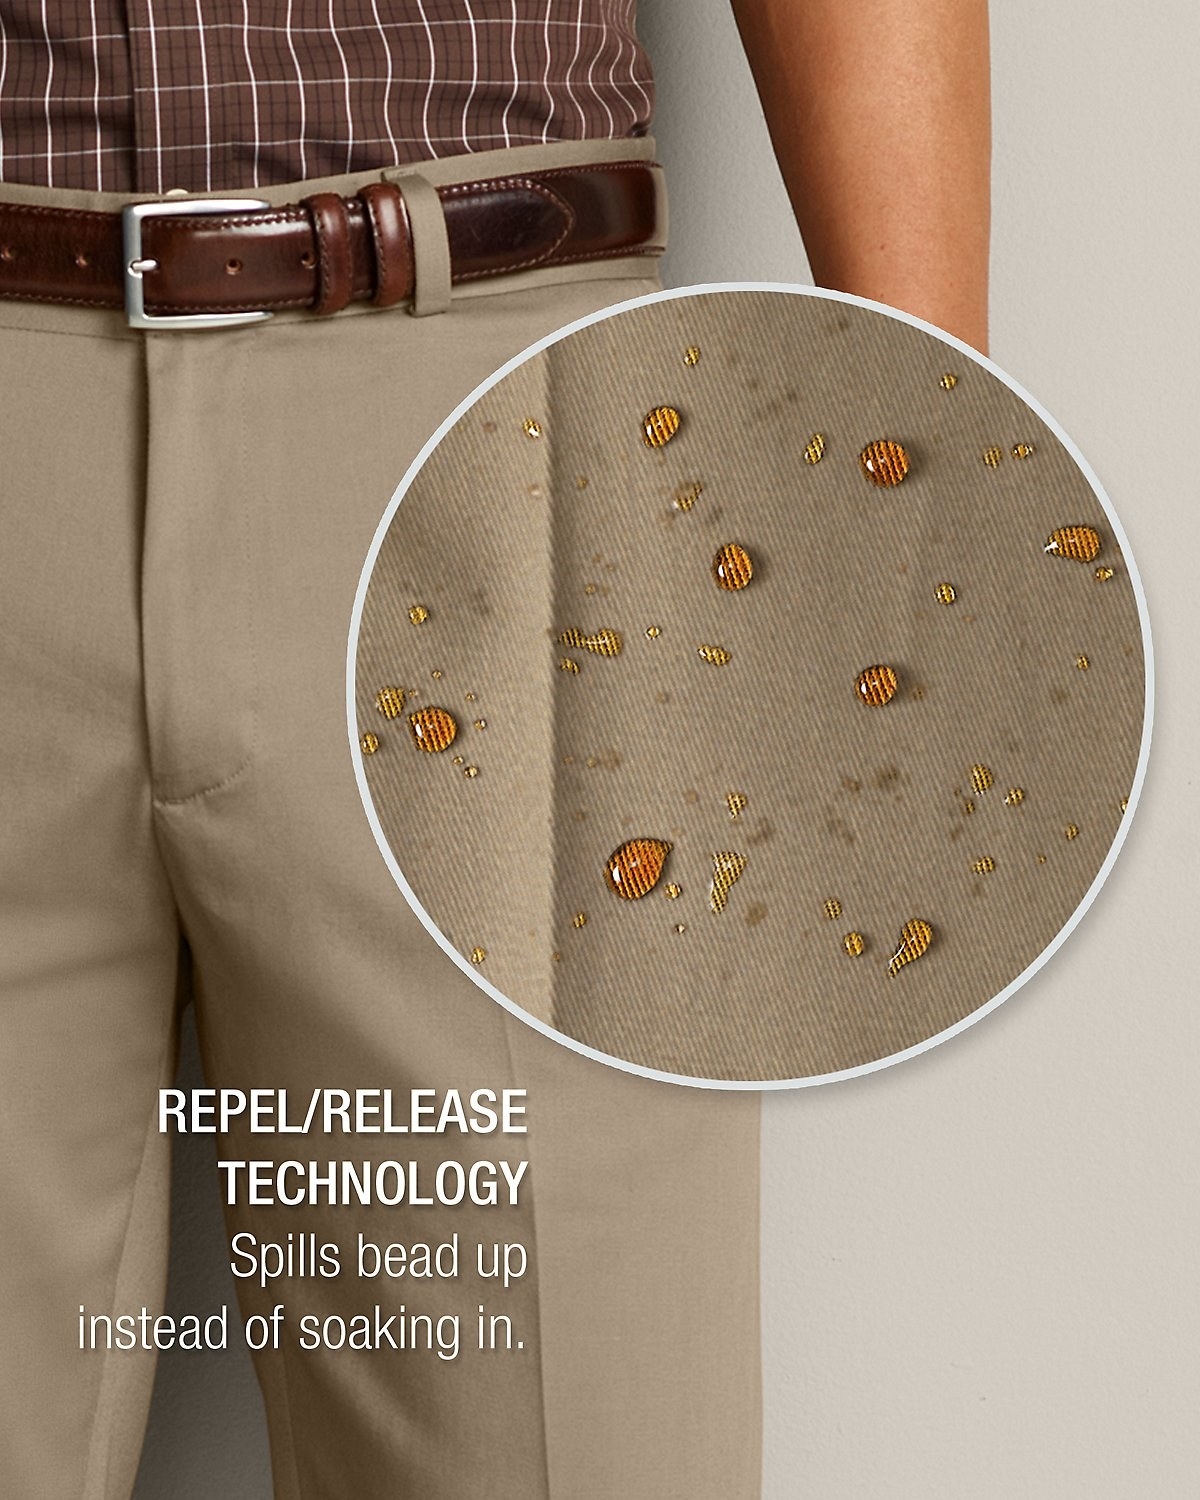 19 Pieces Of Clothing That Are Basically Impossible To Stain